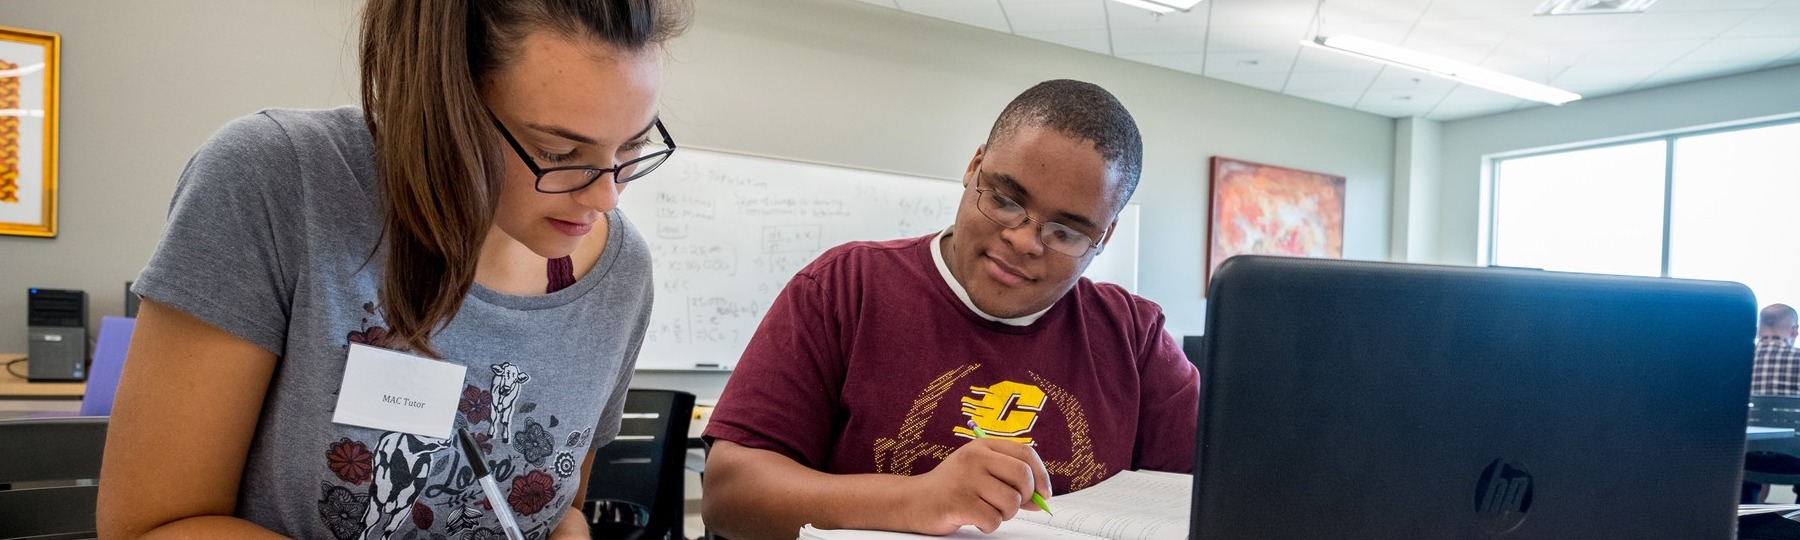 A Central Michigan University student tutoring another student at the Writing Center in Park Library.